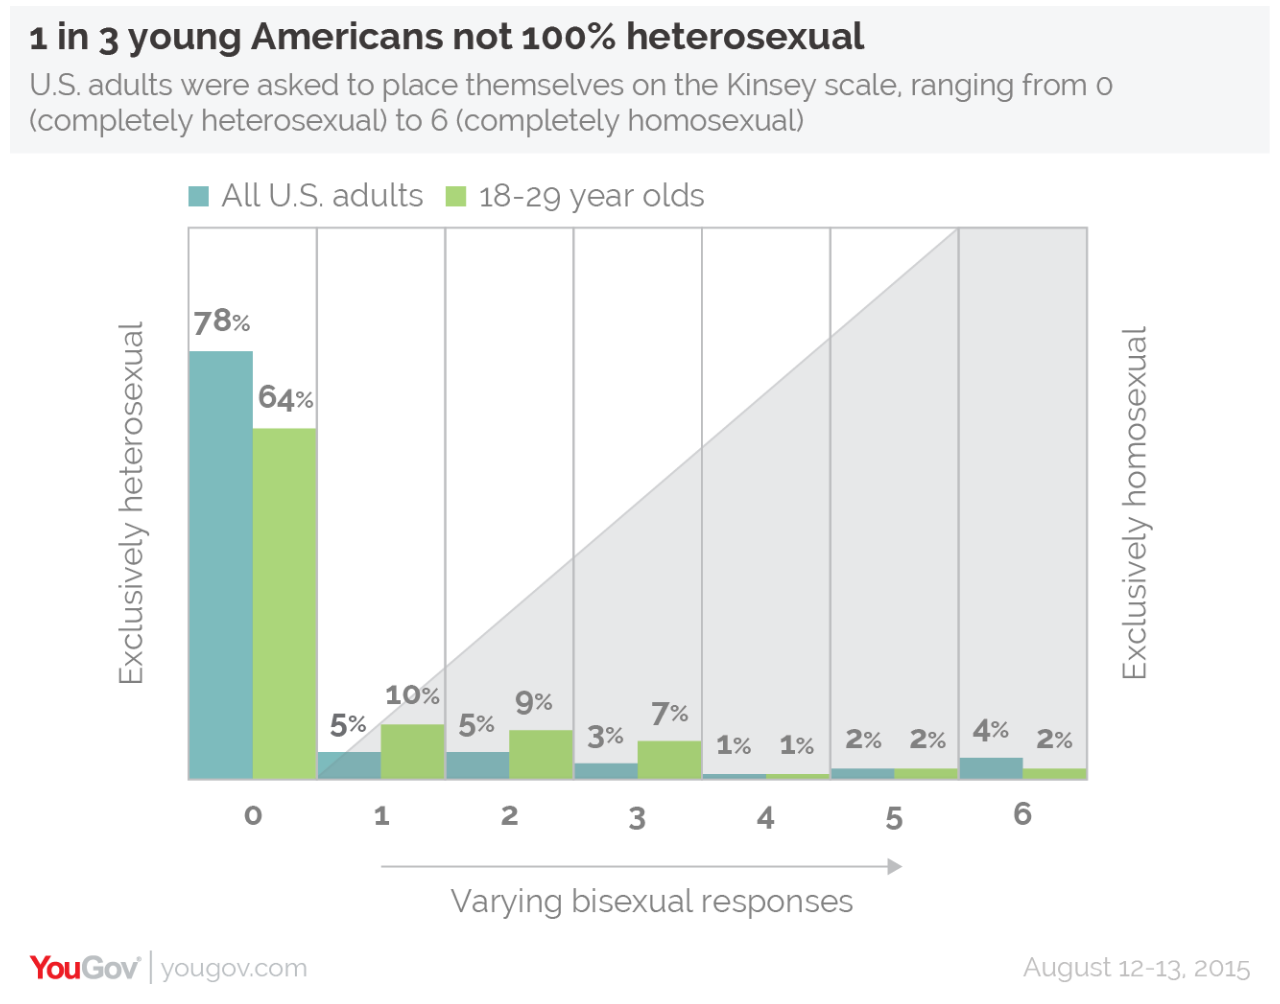 LEVEL OF AMERICAN SEXUALITY BY AGE CHART INCLUDED IN STUDY PUBLISHED BY YOUGOV.COM